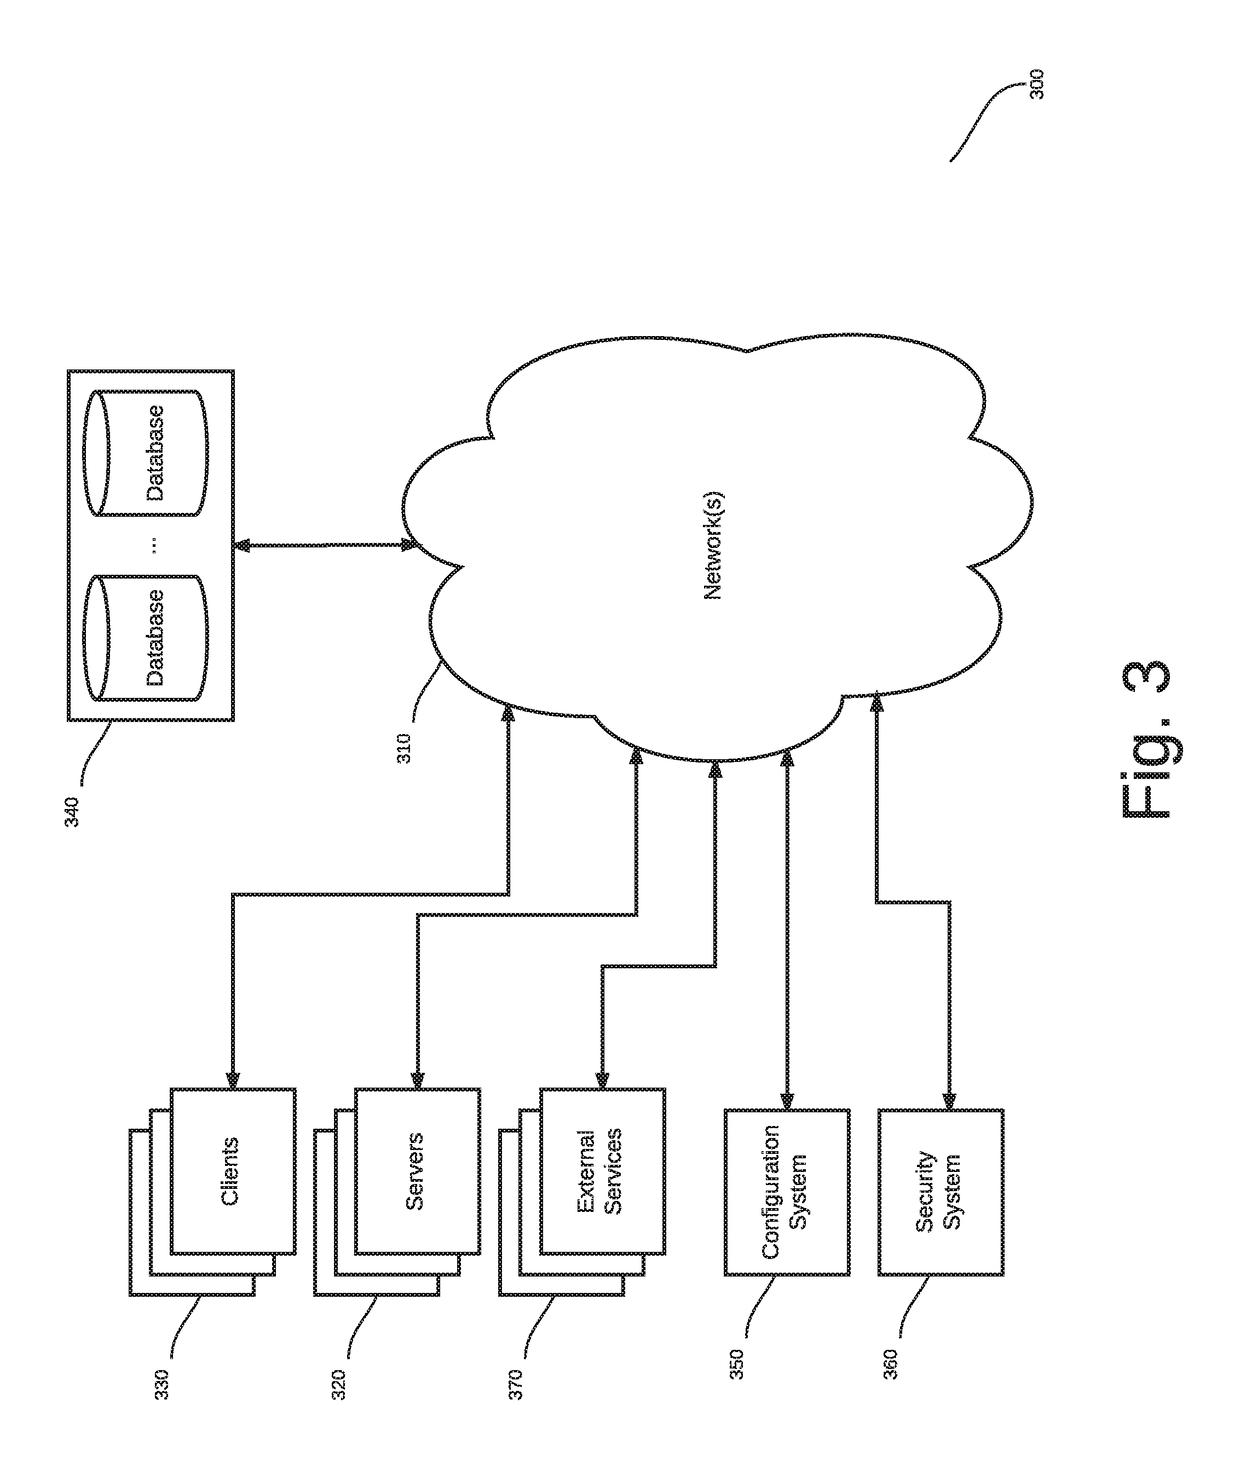 System and method for computational disambiguation and prediction of dynamic hierarchical data structures